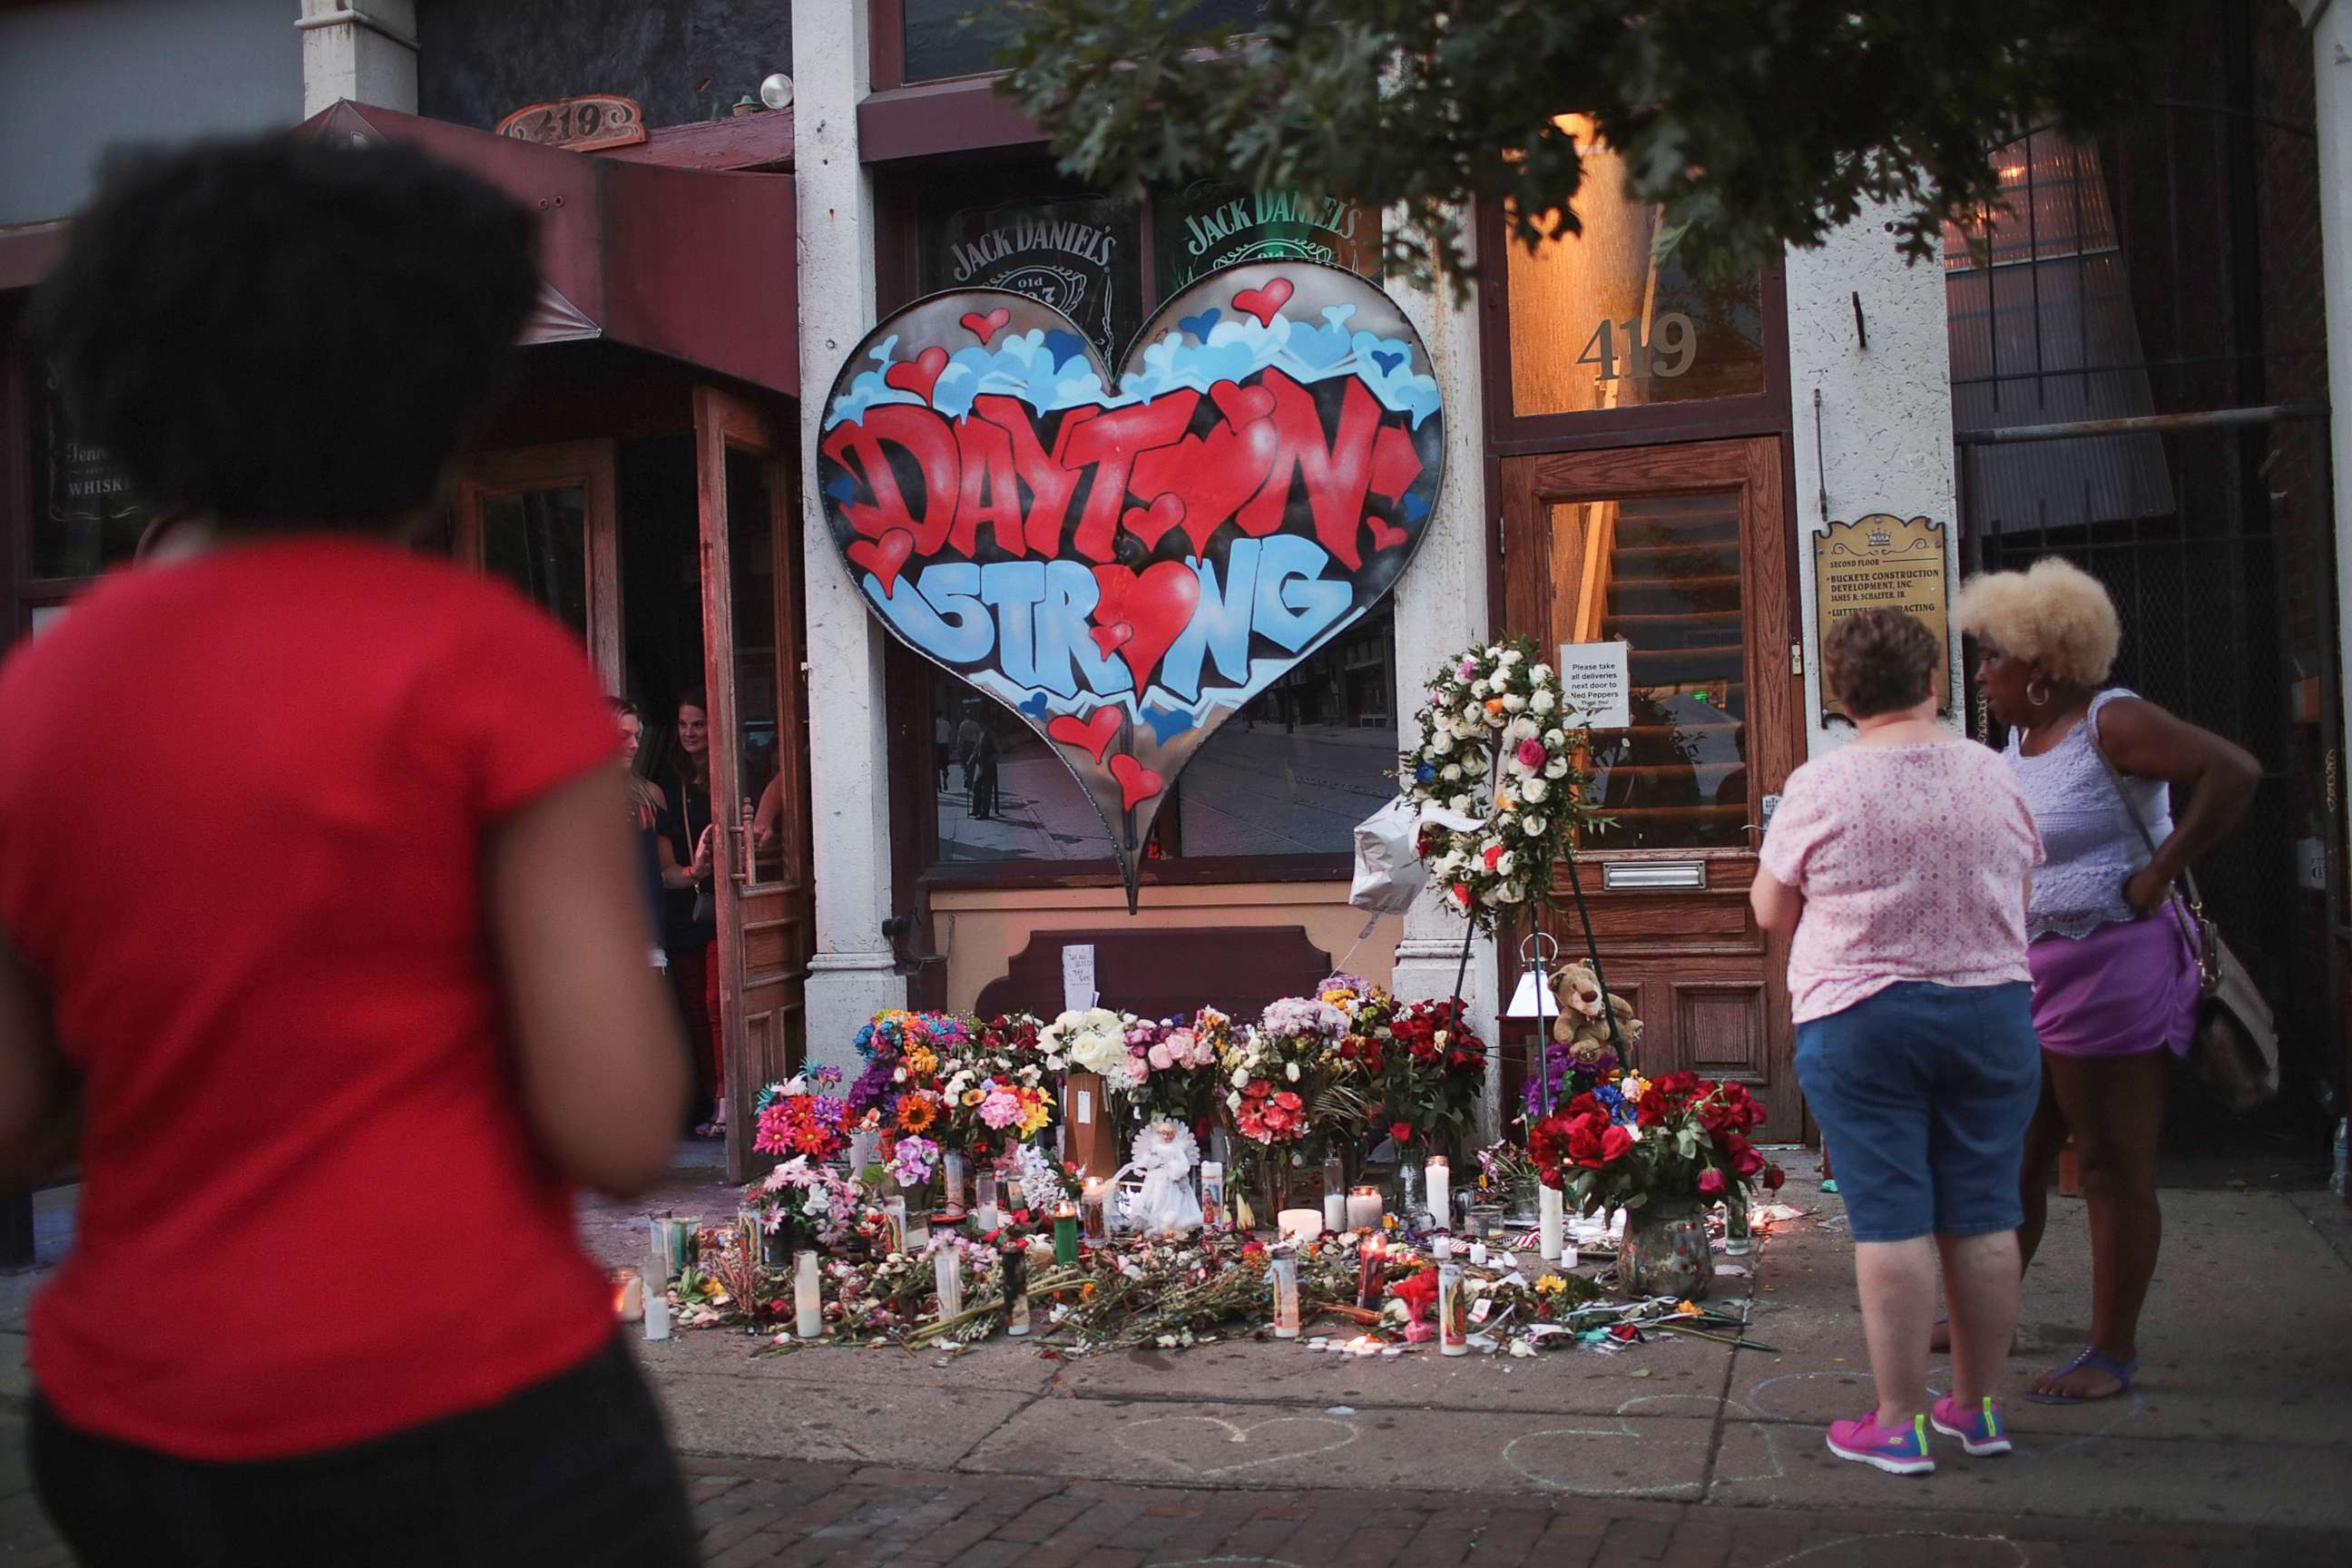 PHOTO: People congregate around a memorial to those killed in Sunday morning's mass shooting on Aug. 6, 2019 in Dayton, Ohio.